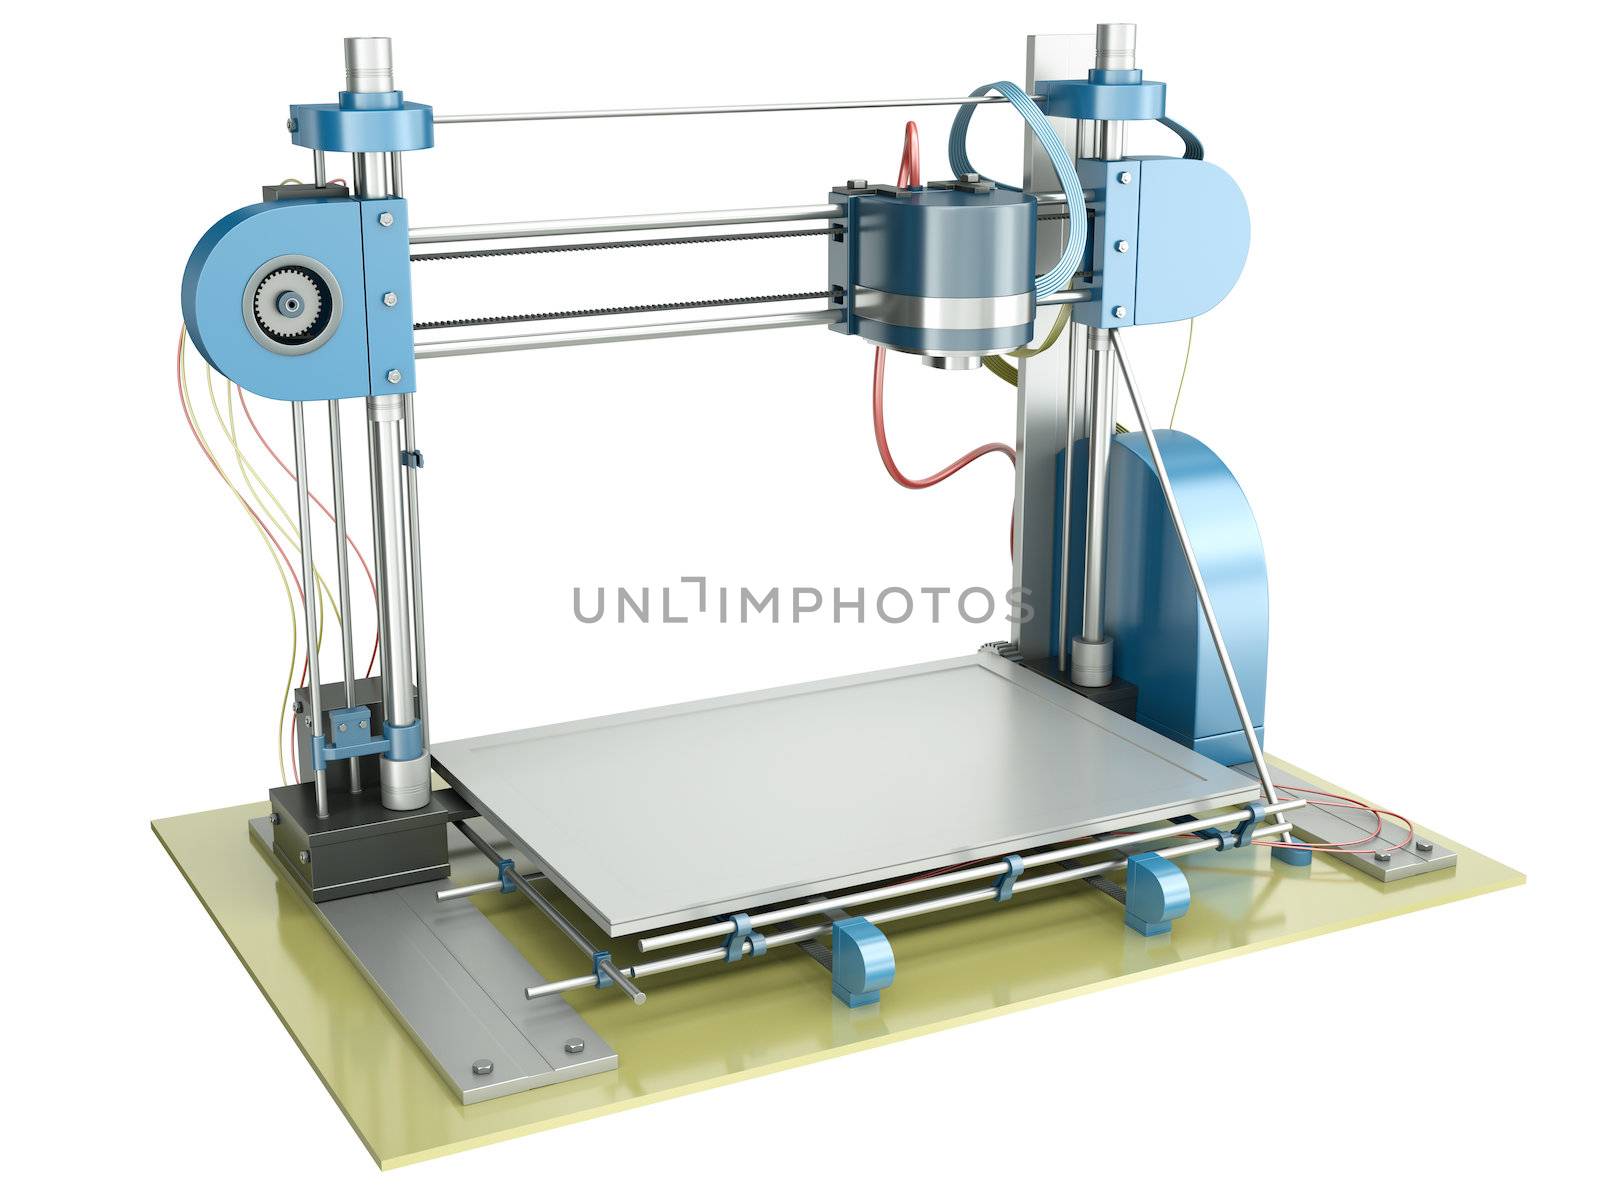 3D printer by bayberry